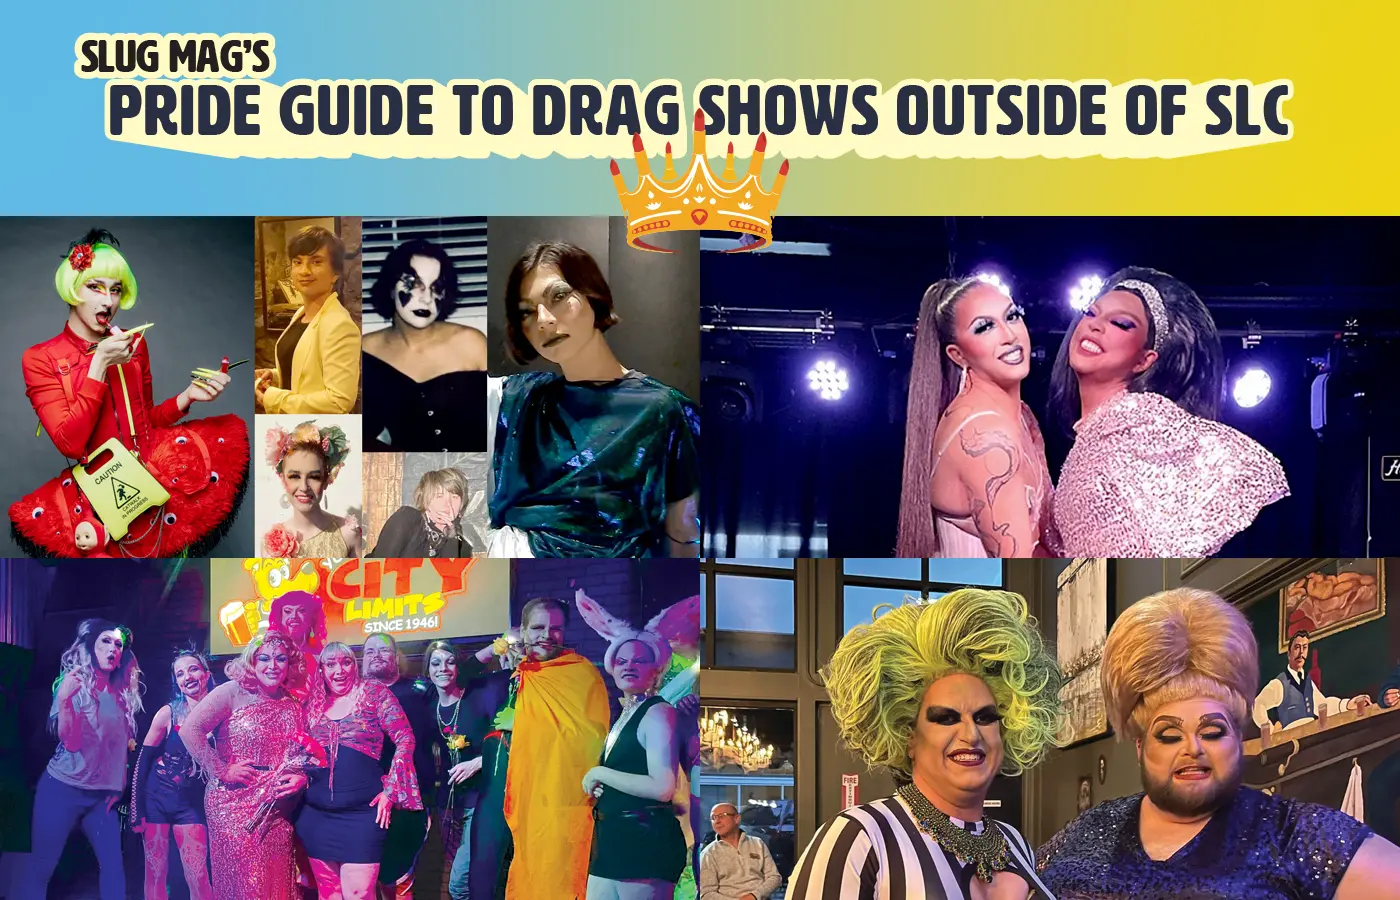 SLUG has put together a list of a few drag shows happening this summer outside of Salt Lake County to highlight how the art form is flourishing in other parts of the state!